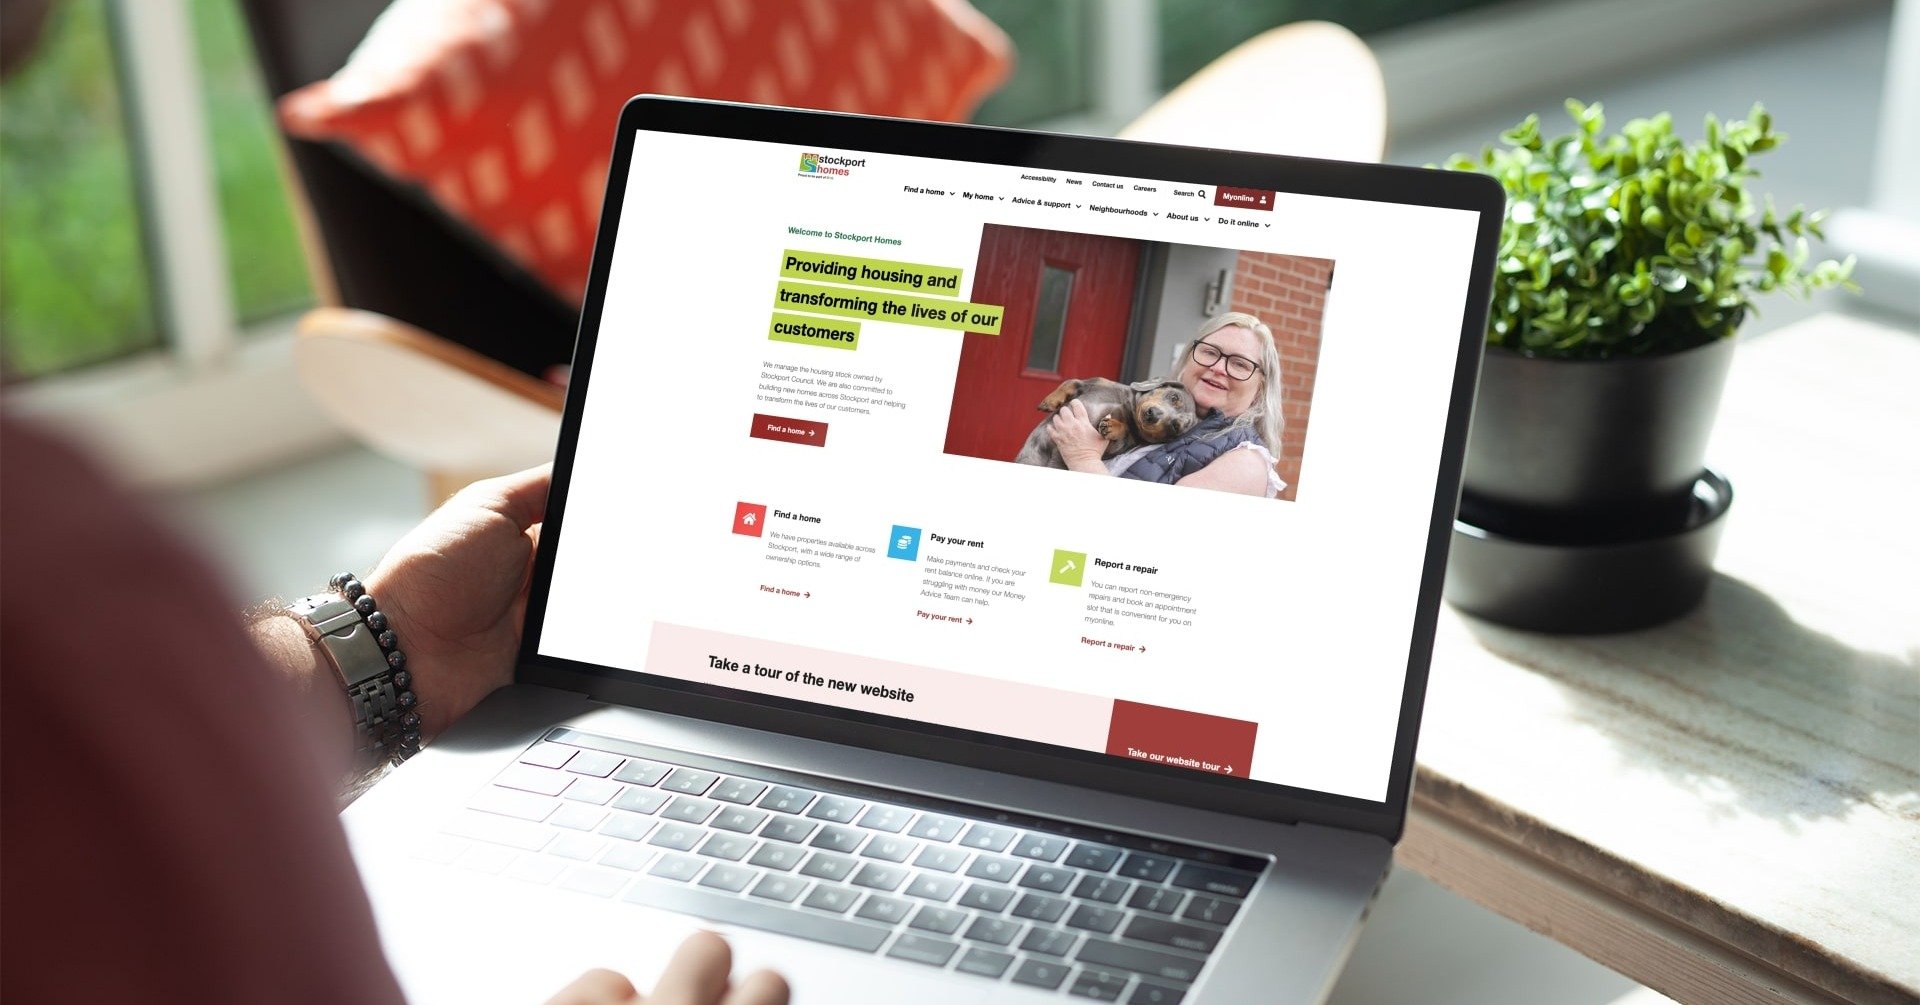 New Stockport Homes website driven by customer feedback